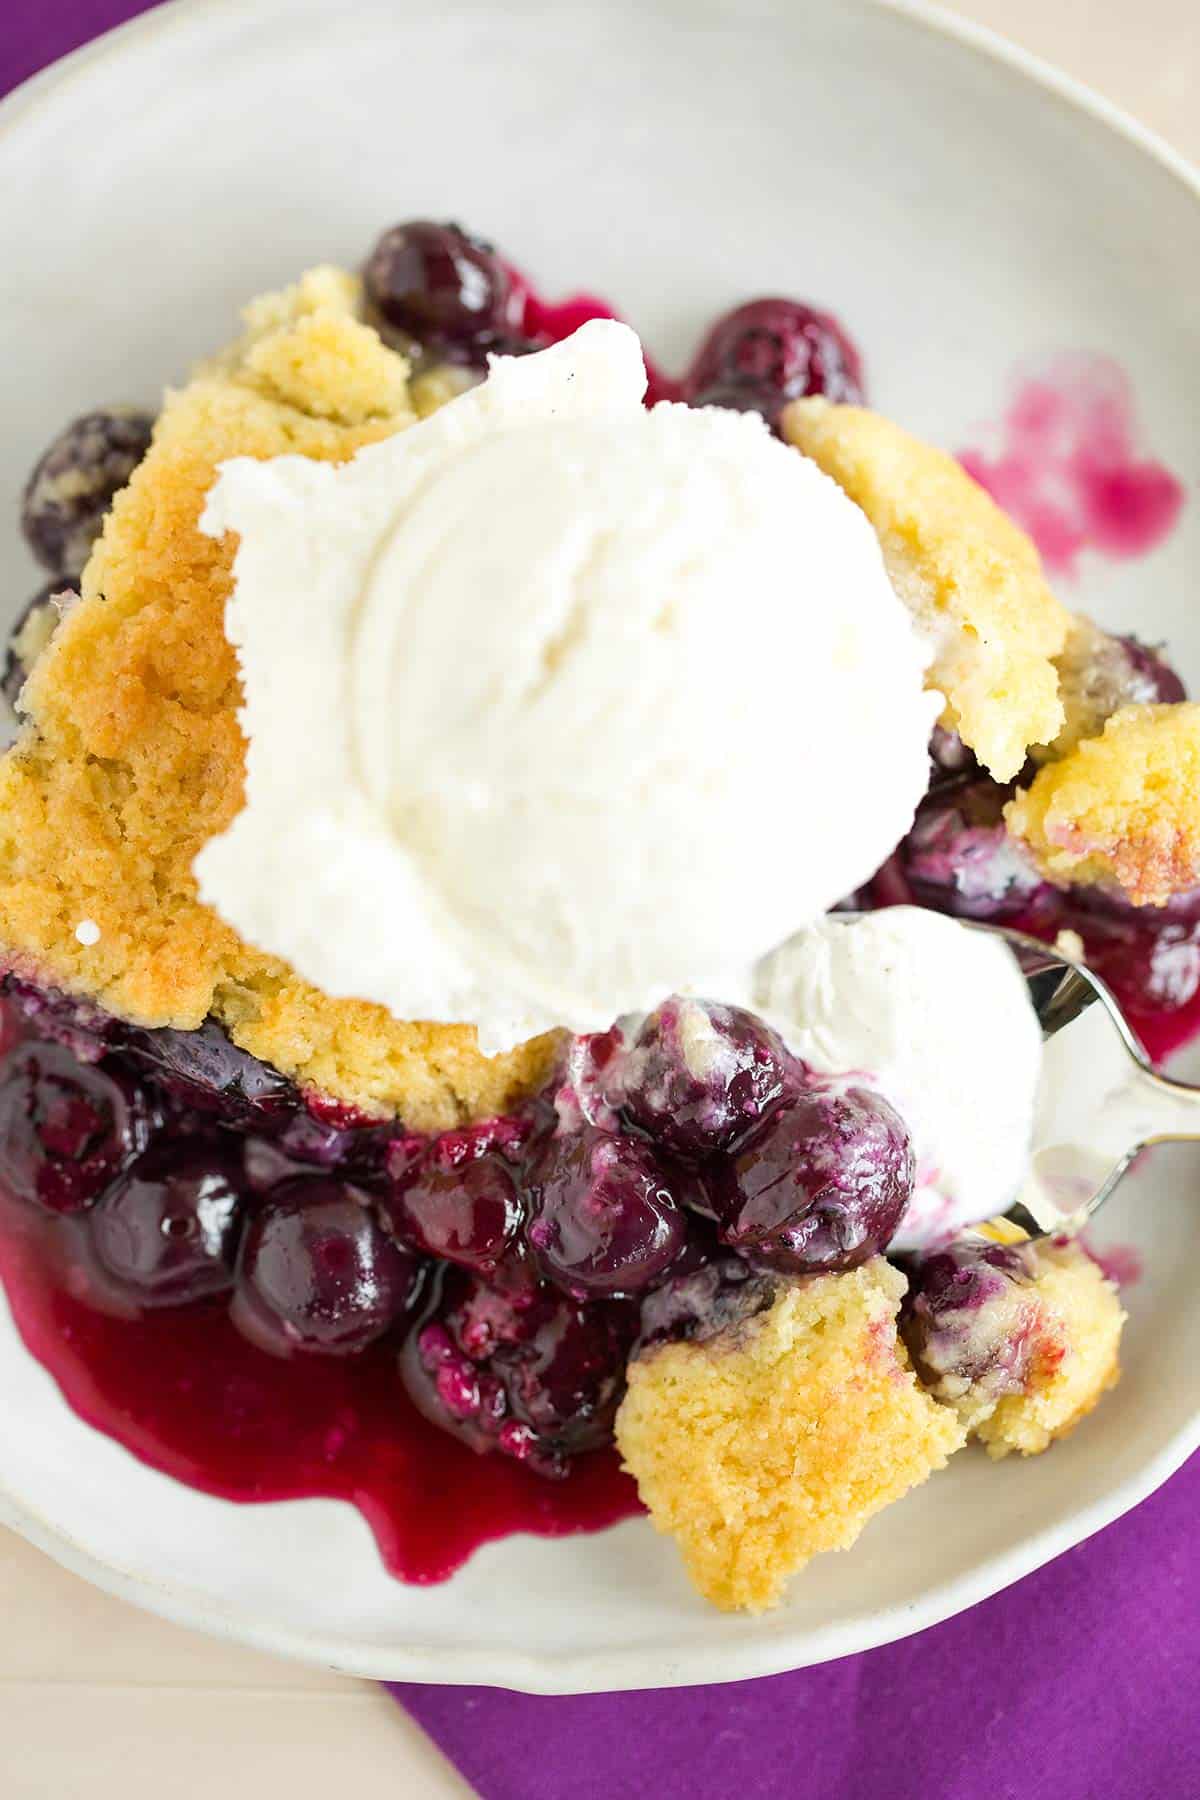 A scoop of blueberry cobbler on a plate with a scoop of vanilla ice cream on top.